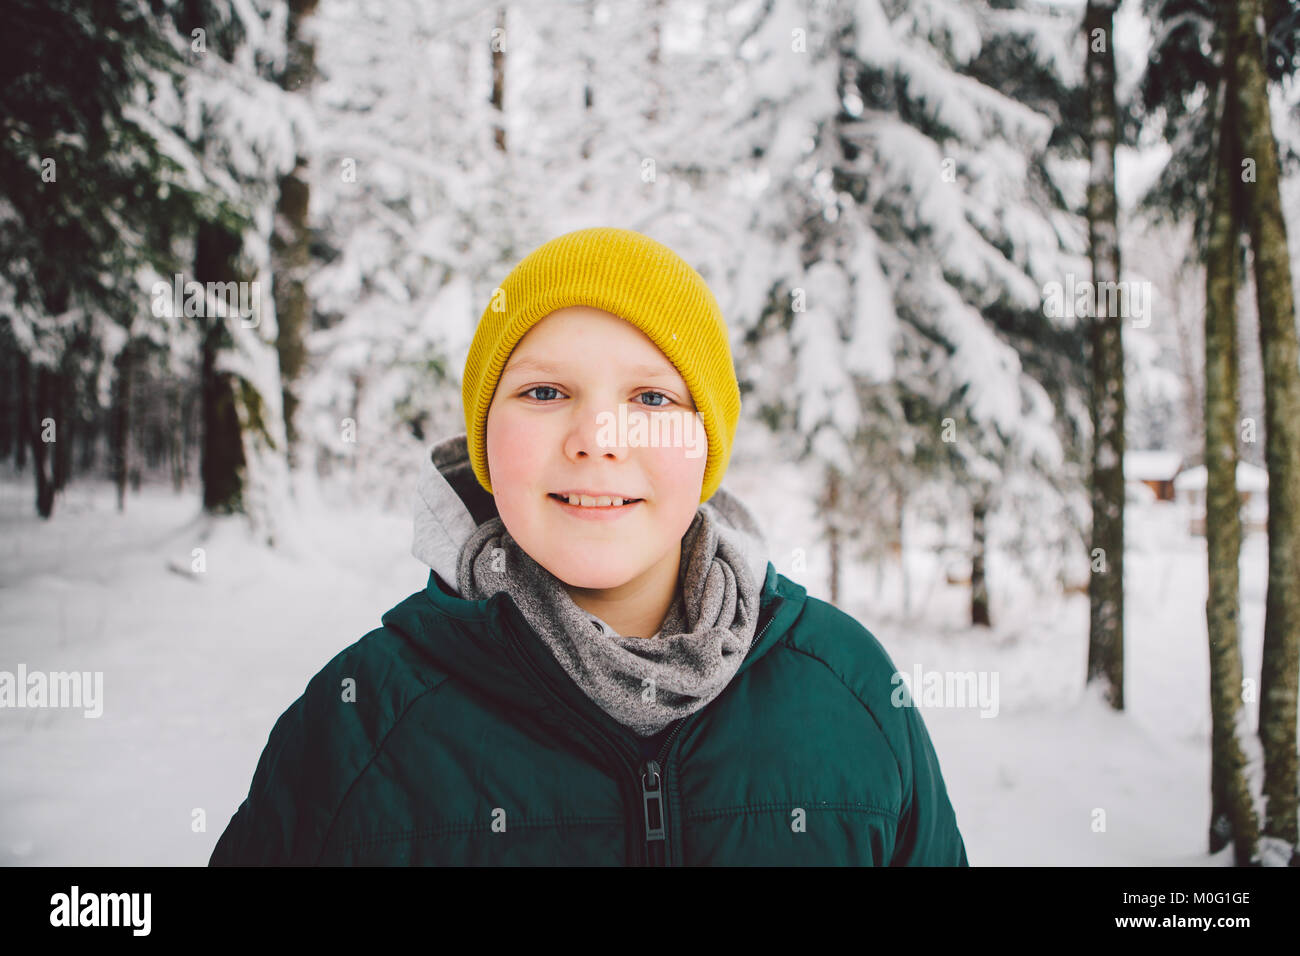 Smiling boys standing in the forest in the snow looking at camera. Stock Photo